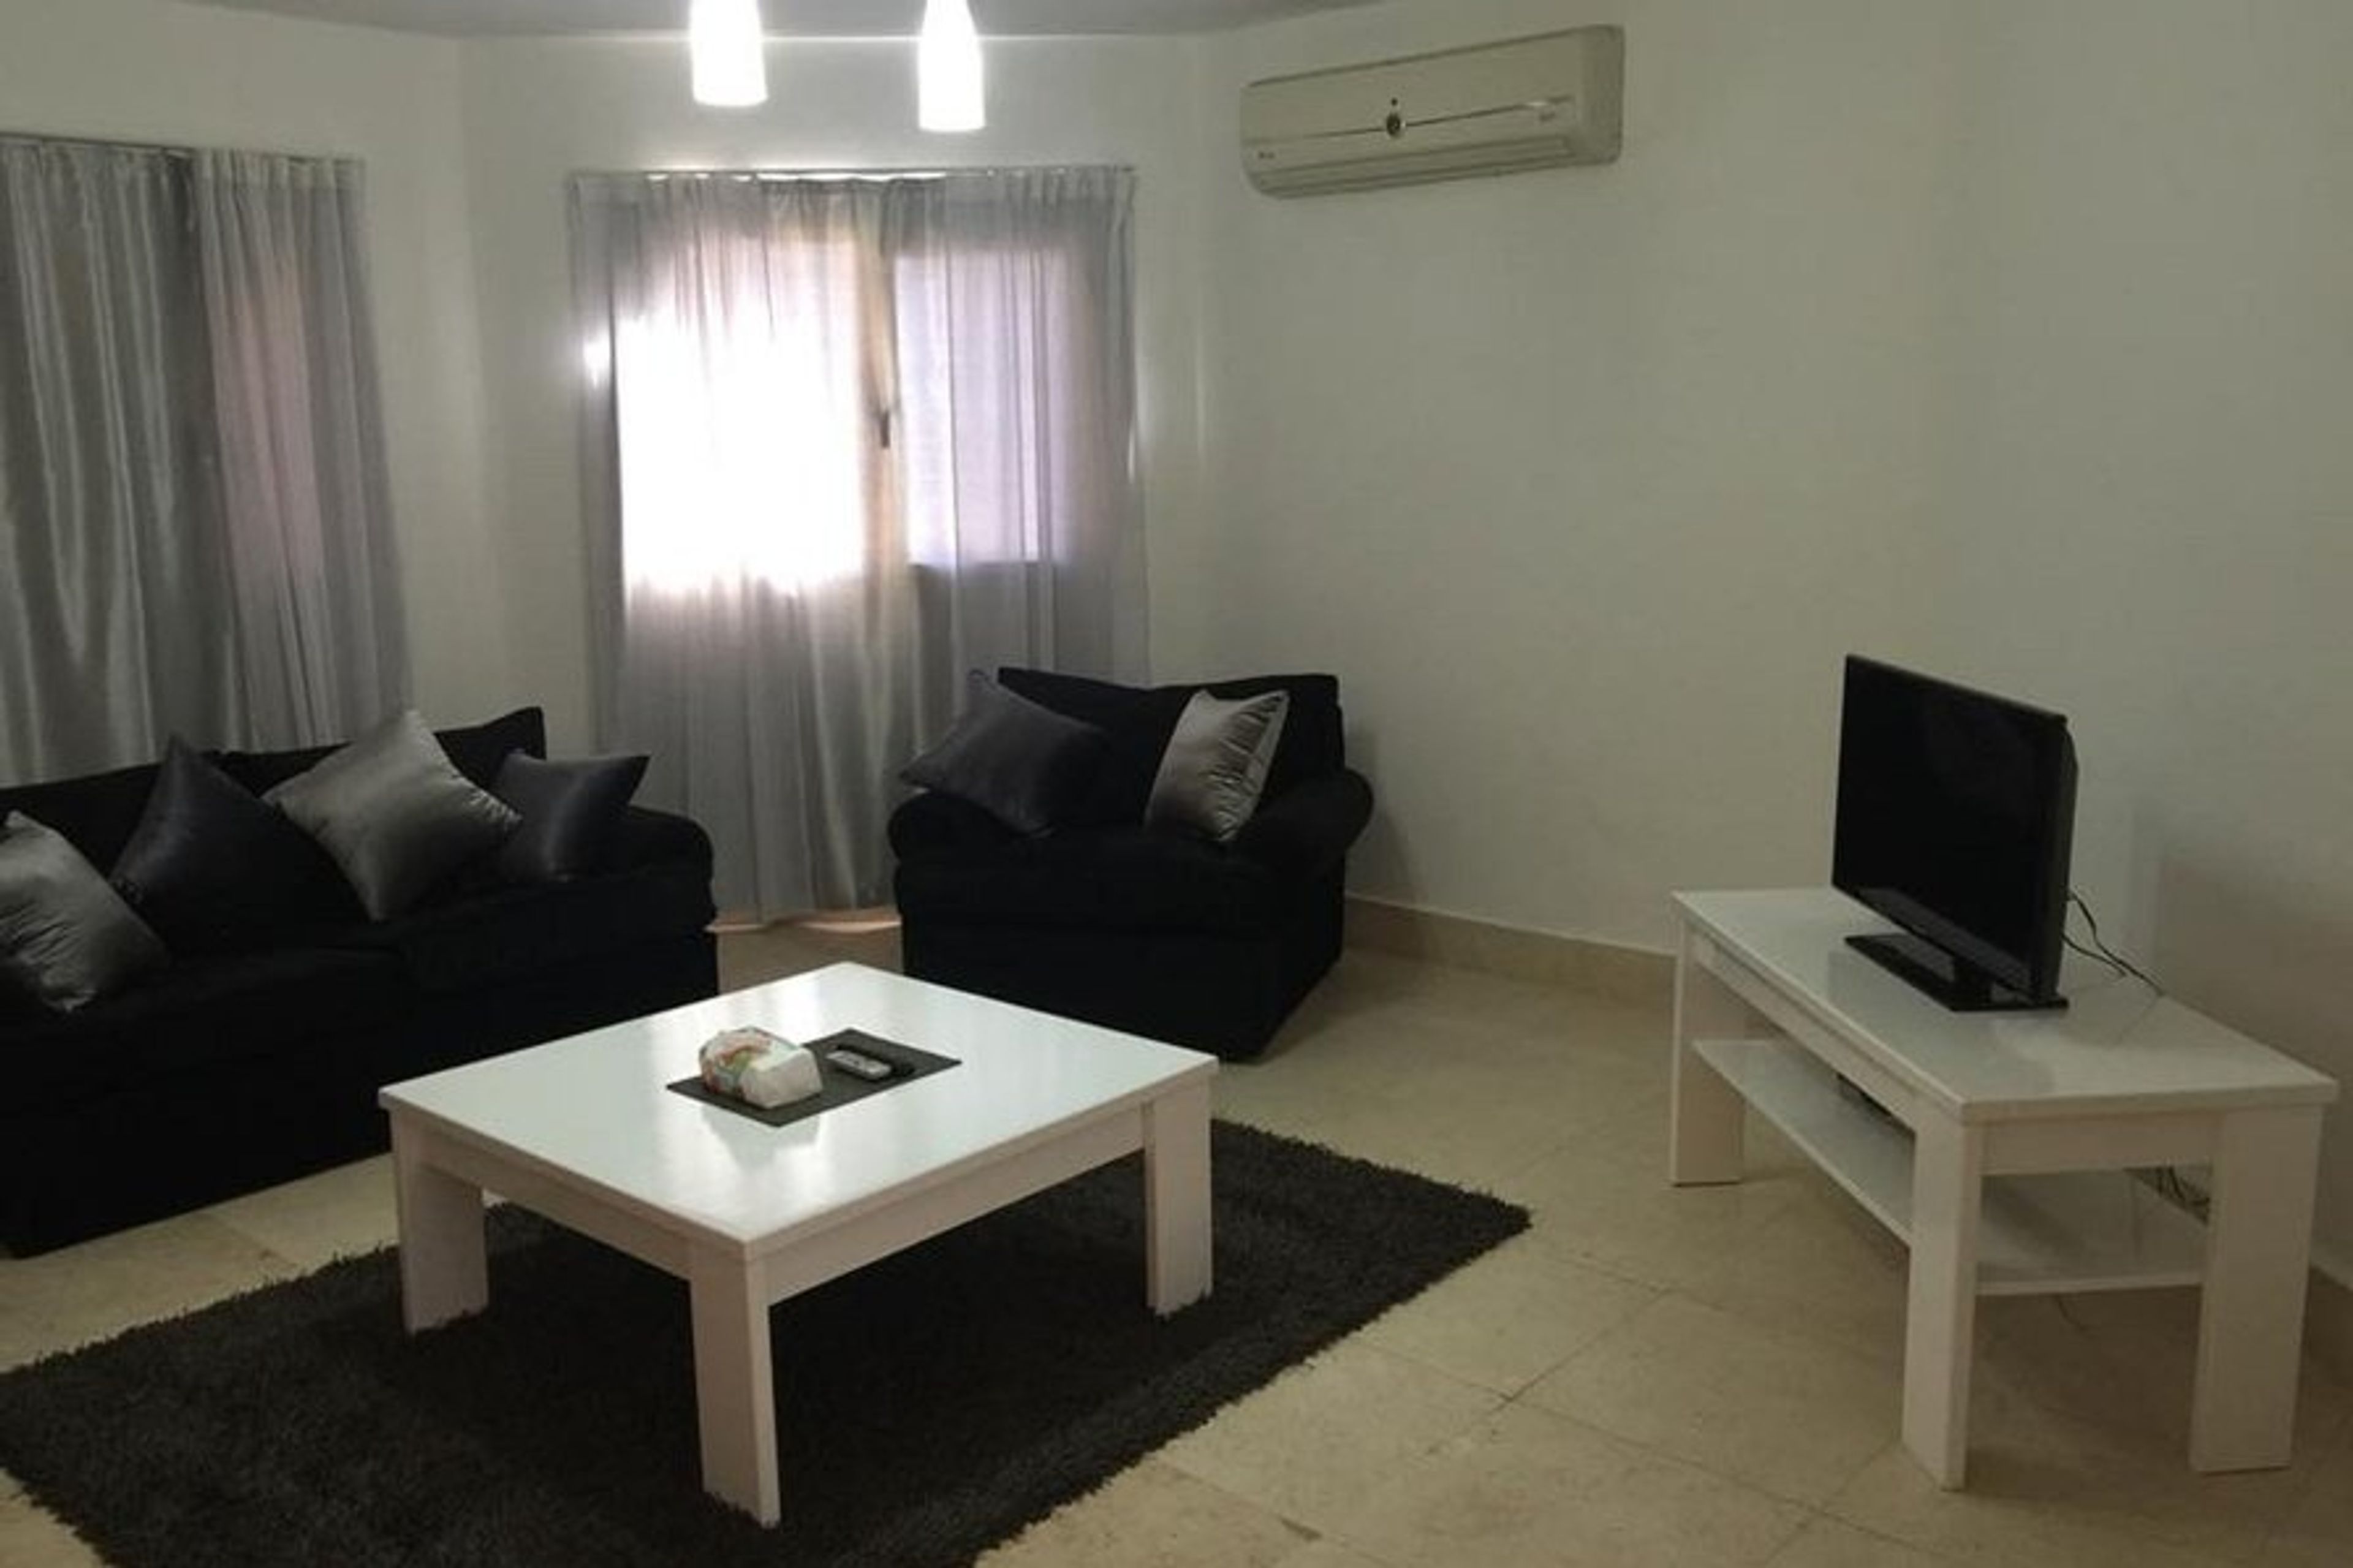 Living area with sofa, arm chair & television with satellite TV